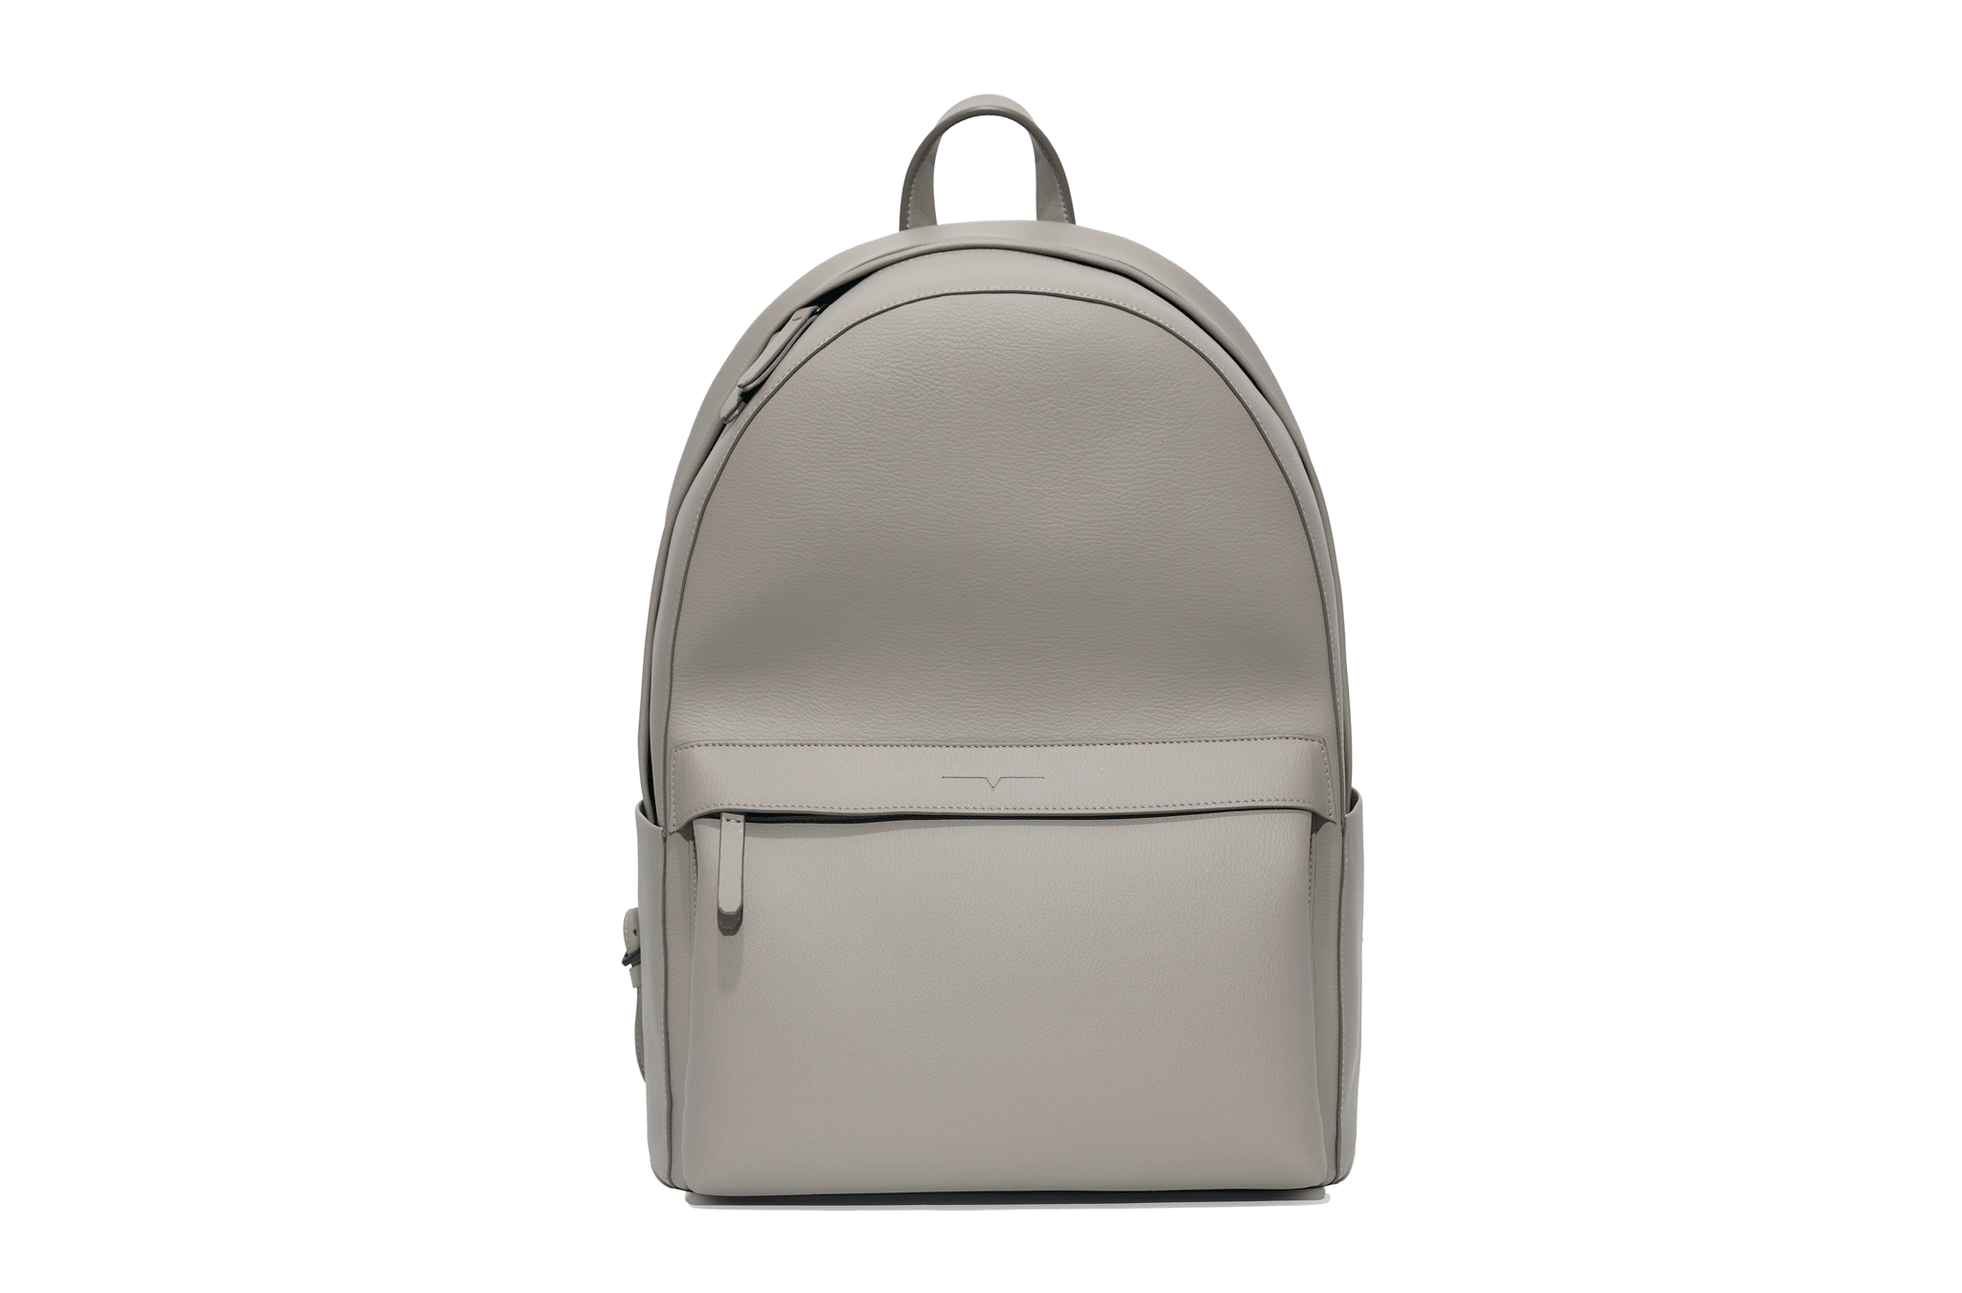 The Classic Backpack - Sample Sale in Technik in Stone image 